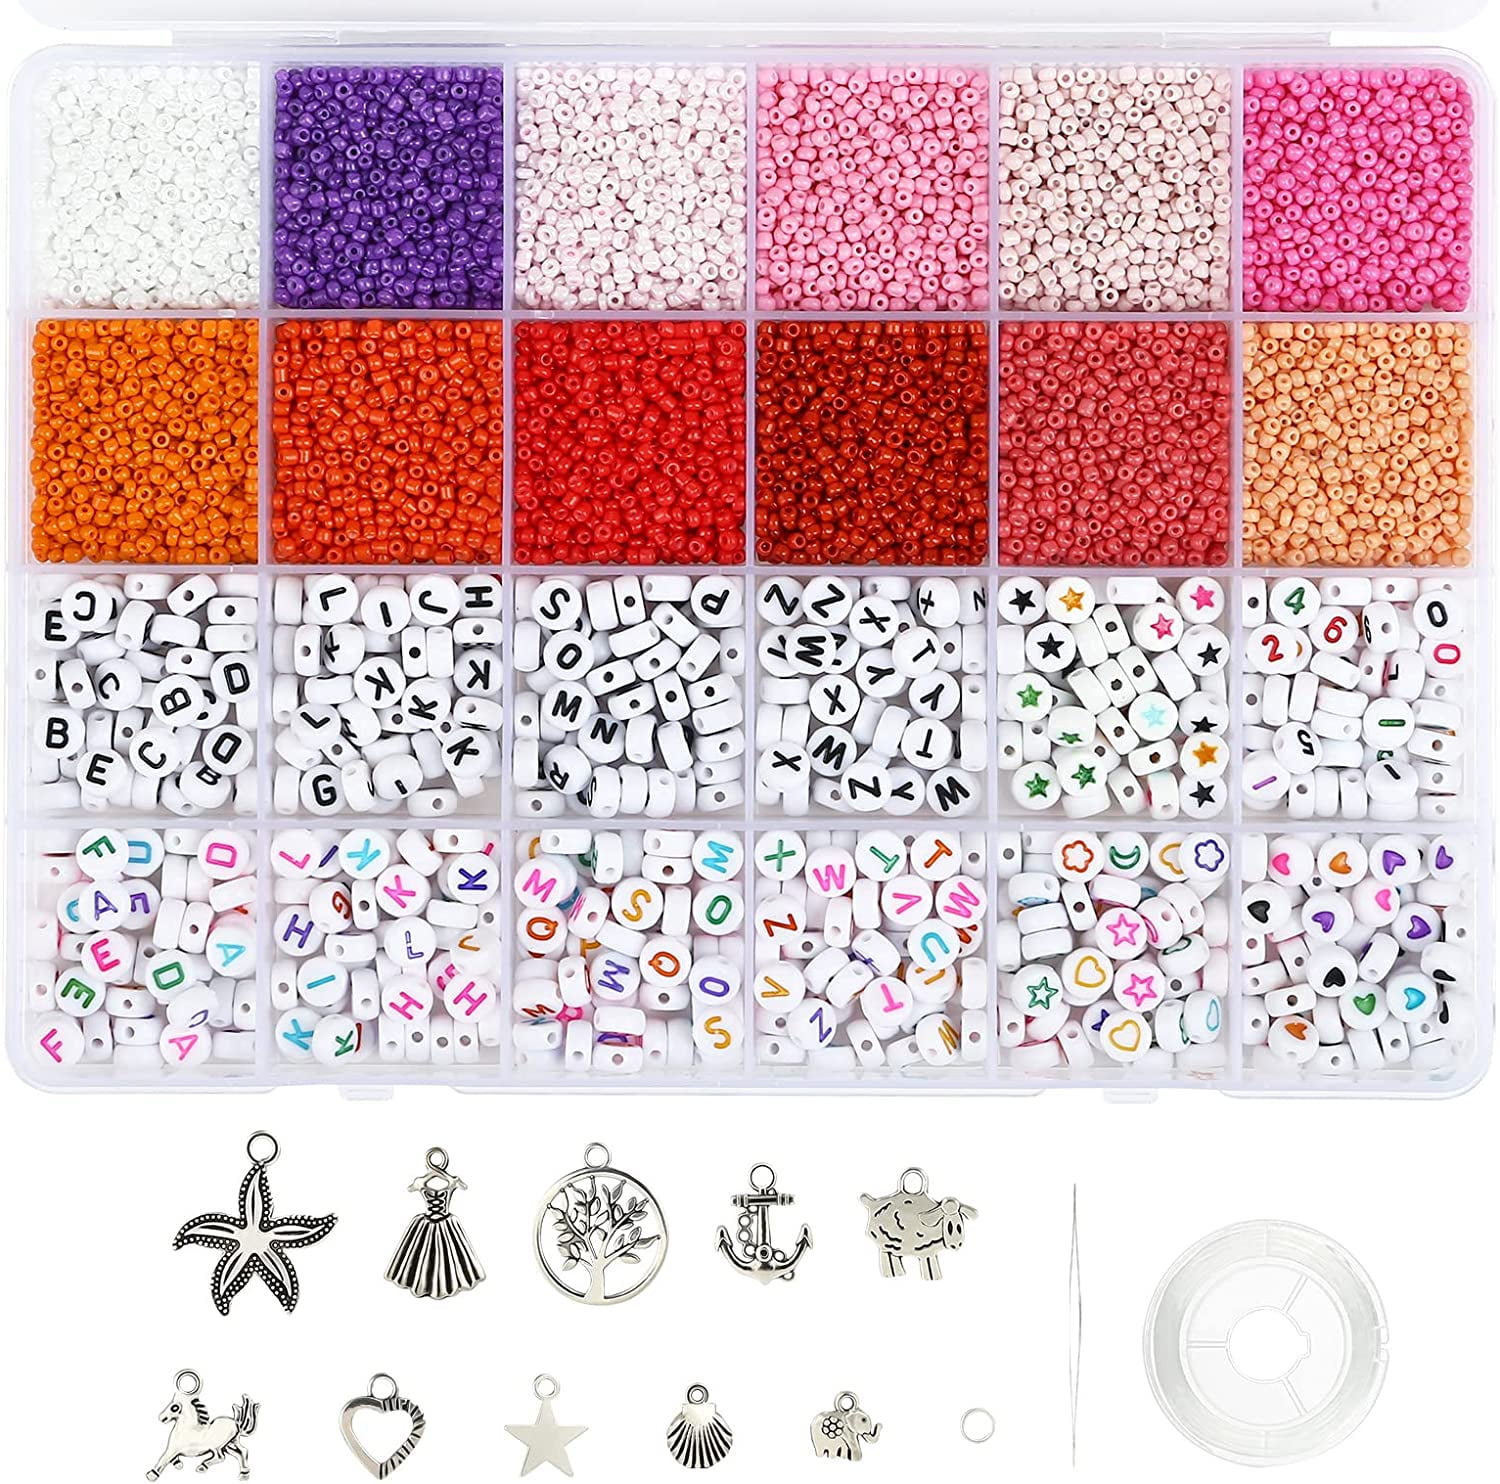  Goody King Jewelry Making Kit Beads for Bracelets